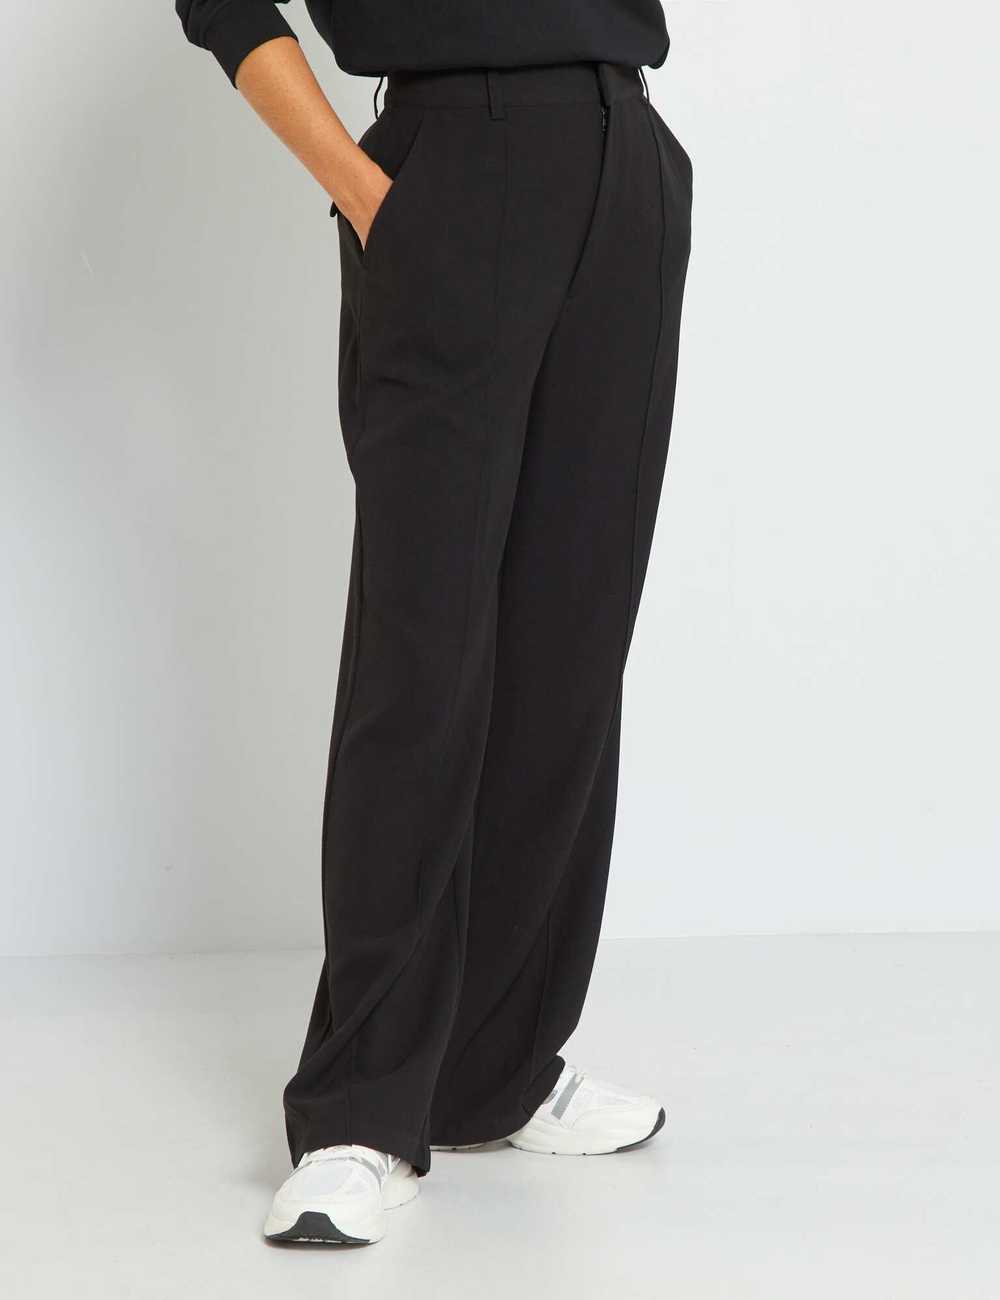 Buy High-waisted twill trousers Online in Dubai & the UAE